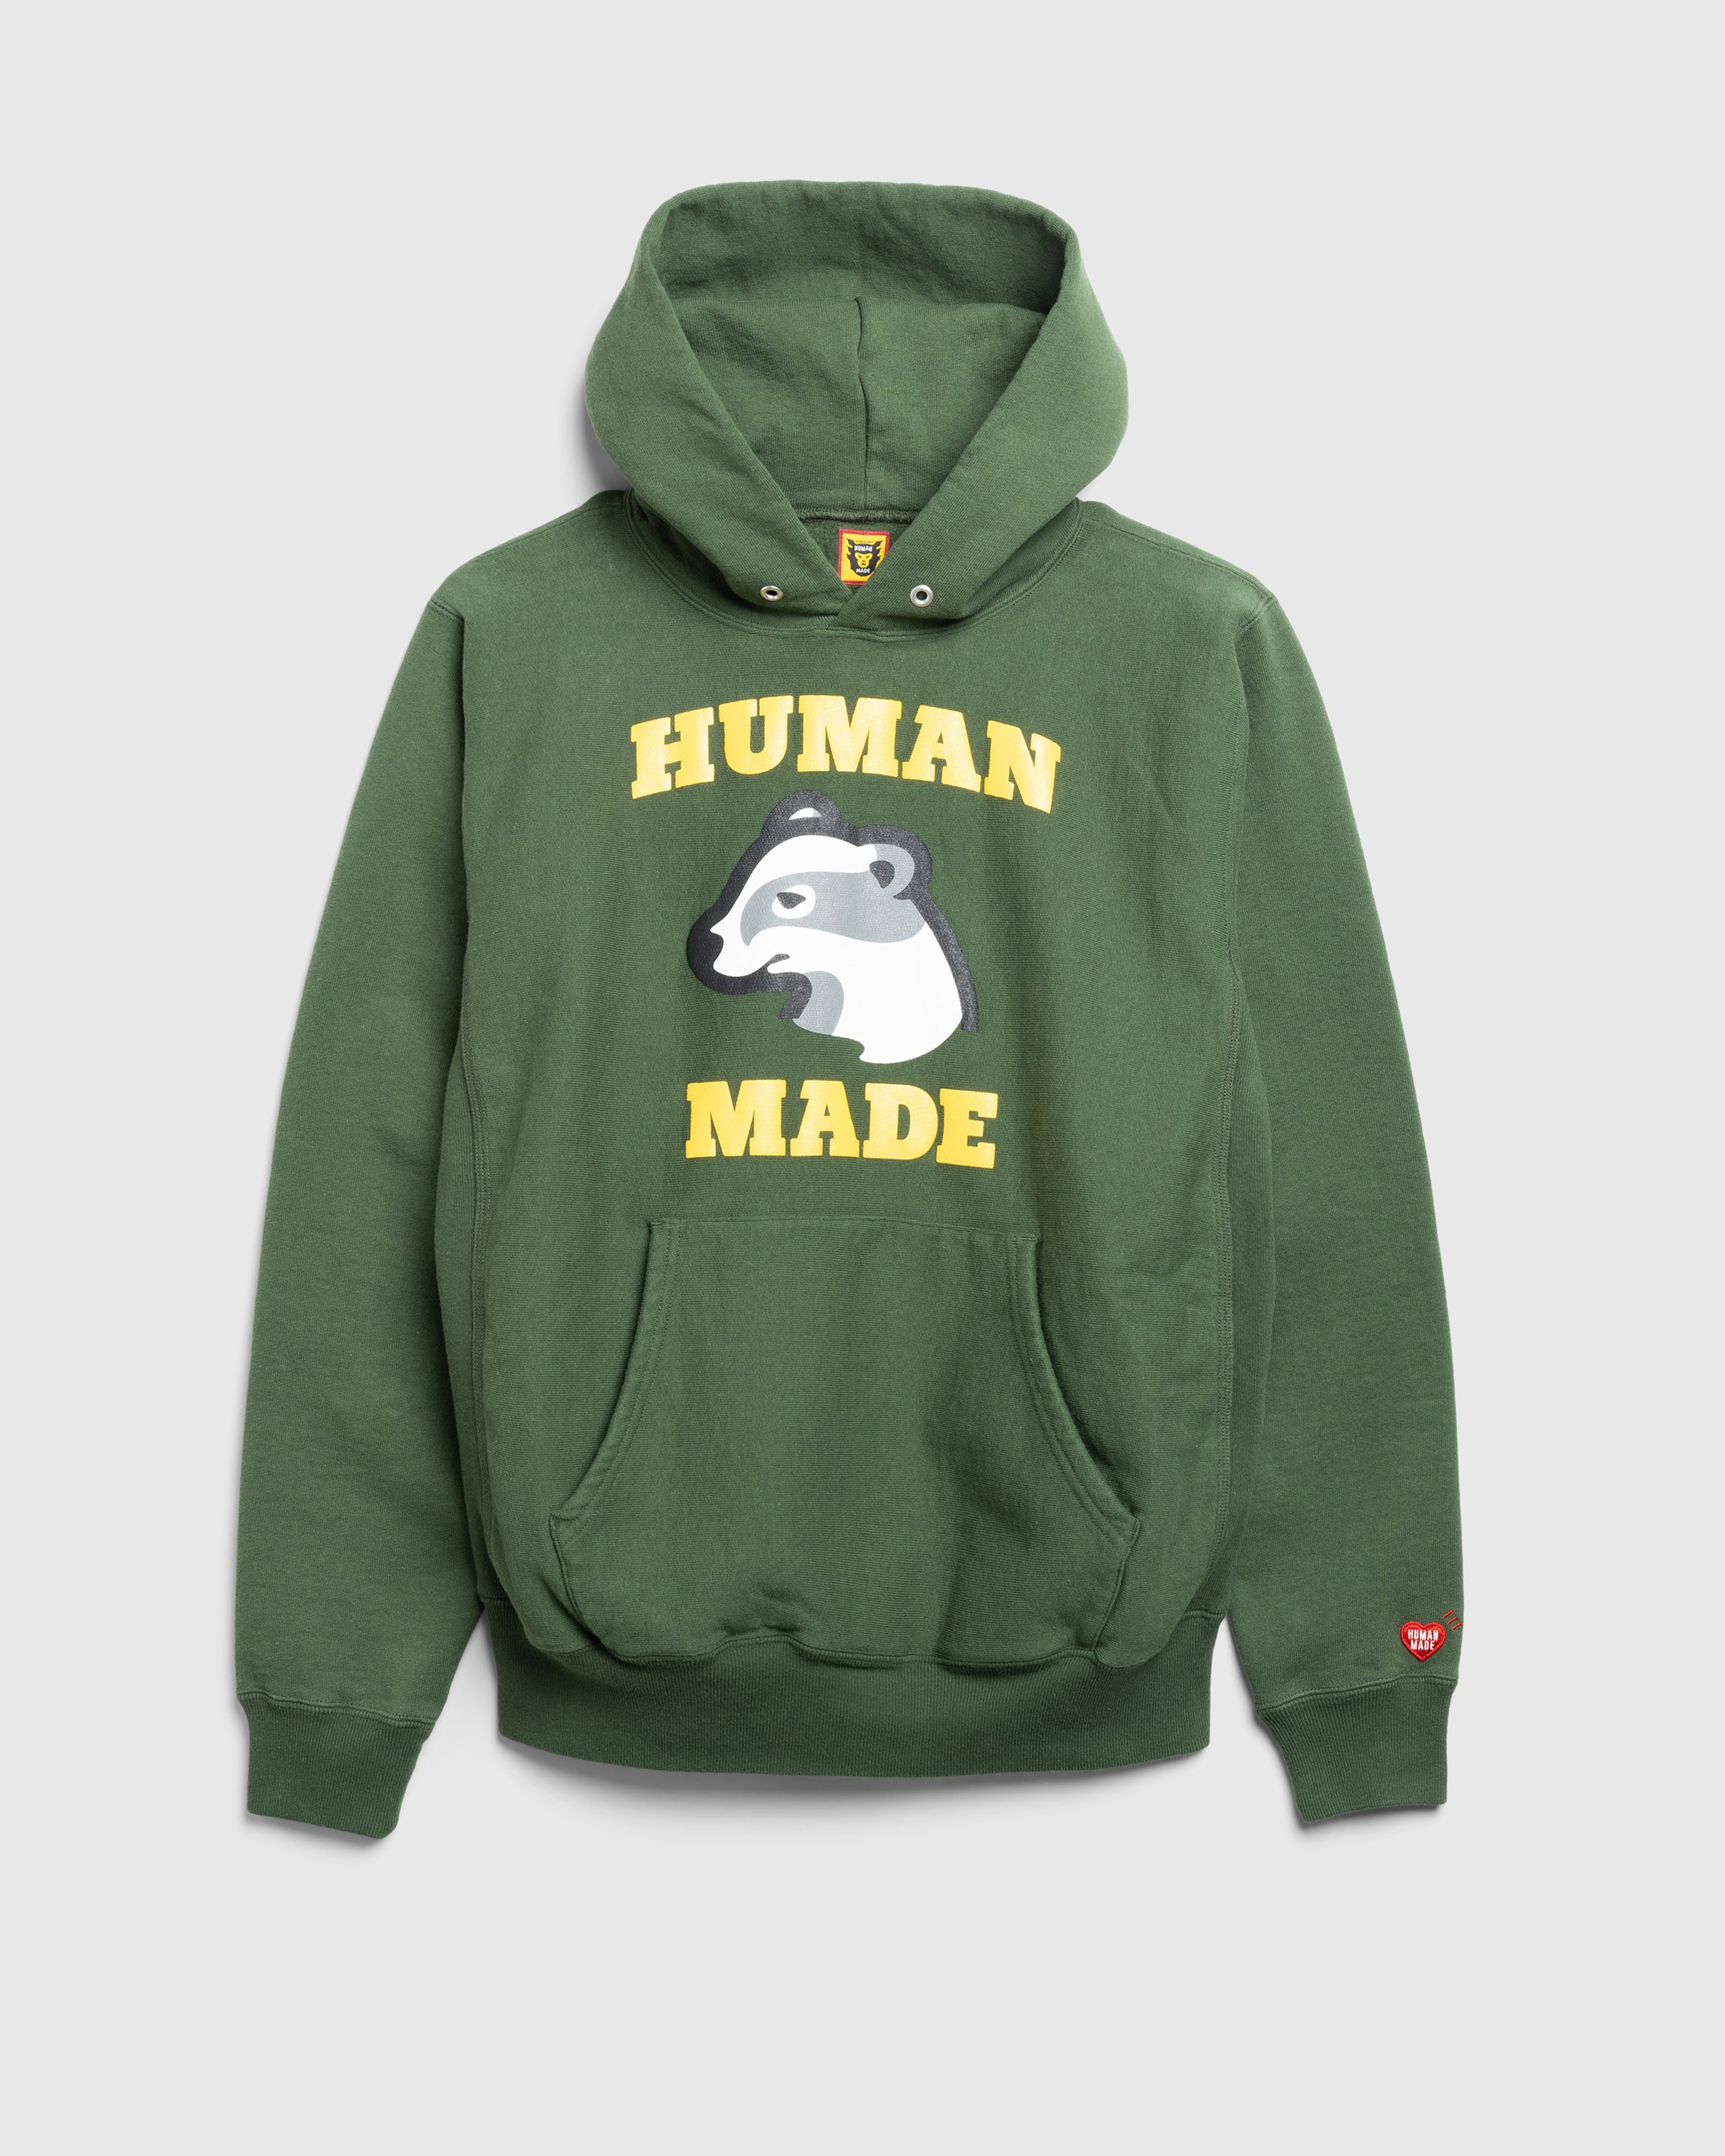 Human Made - HEAVY WEIGHT HOODIE #1 Green - Clothing - Green - Image 1